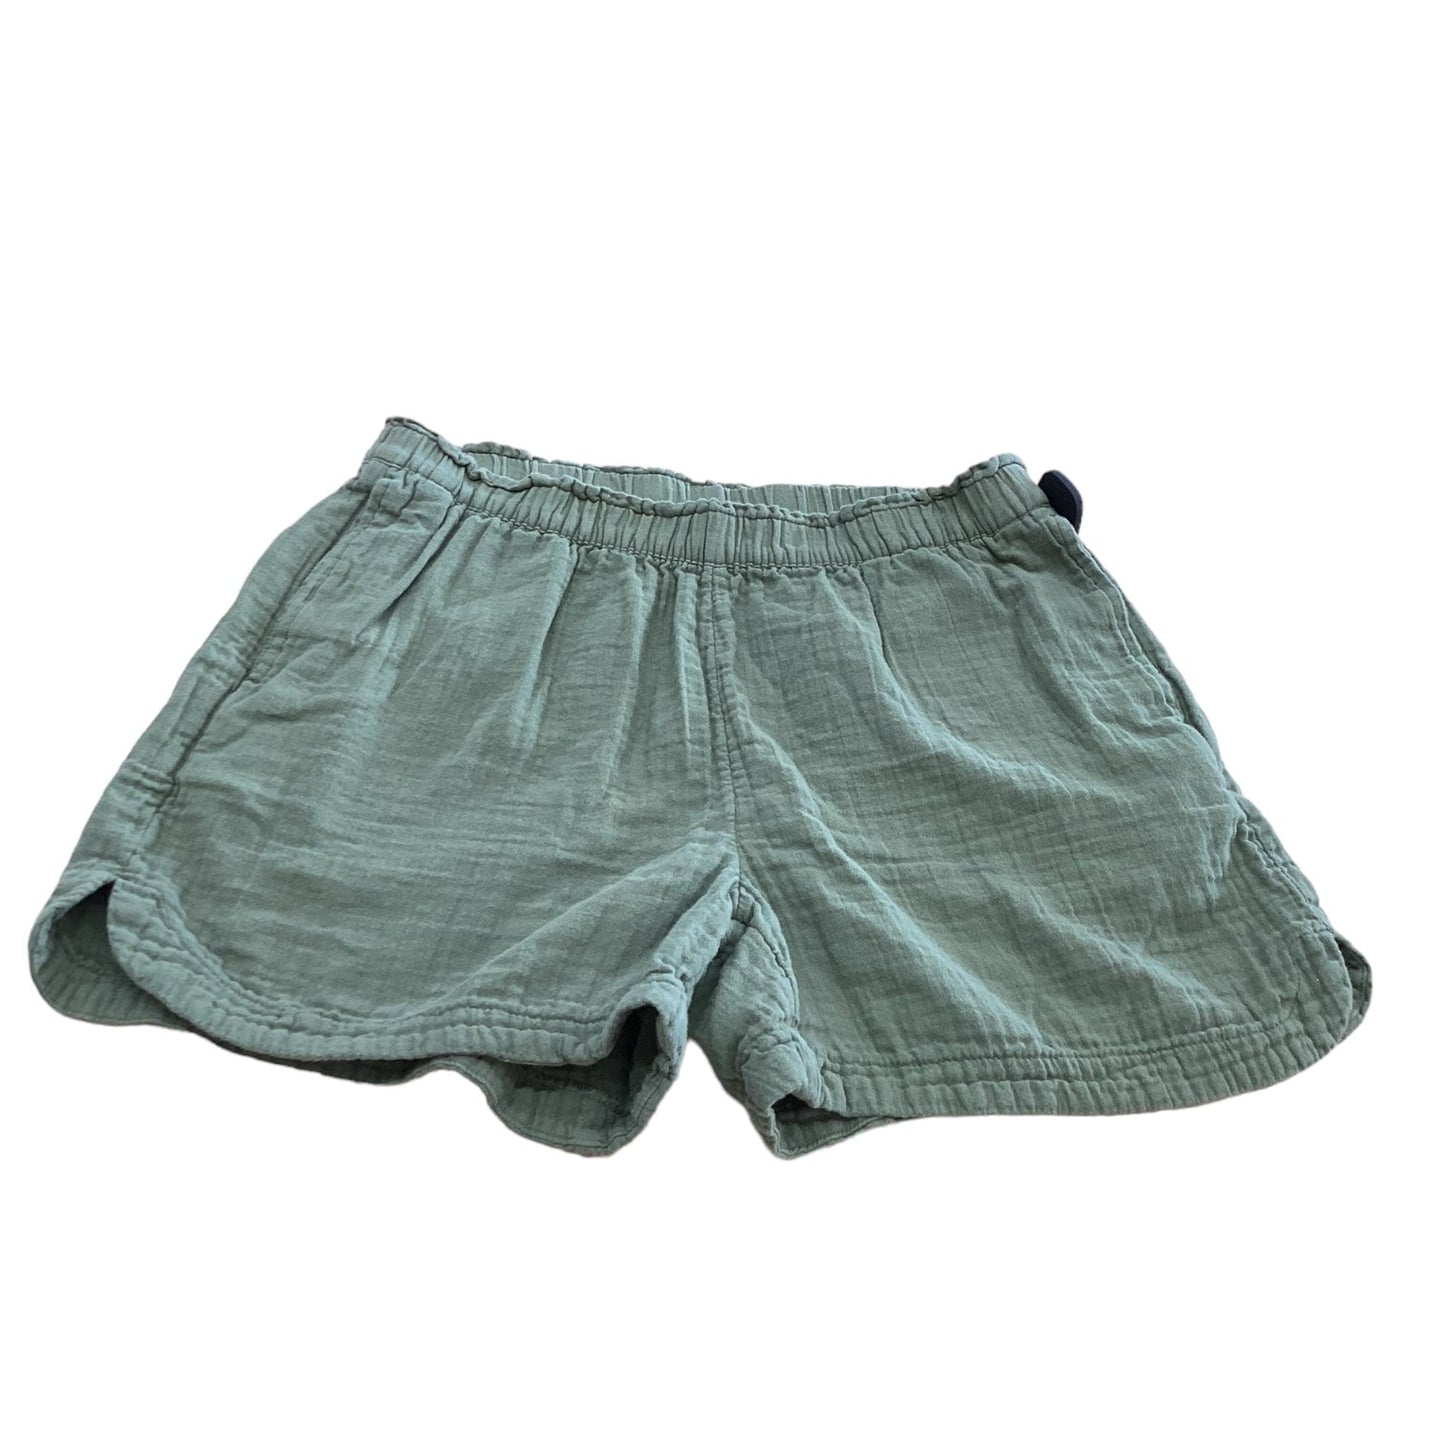 Green Shorts Old Navy, Size 12